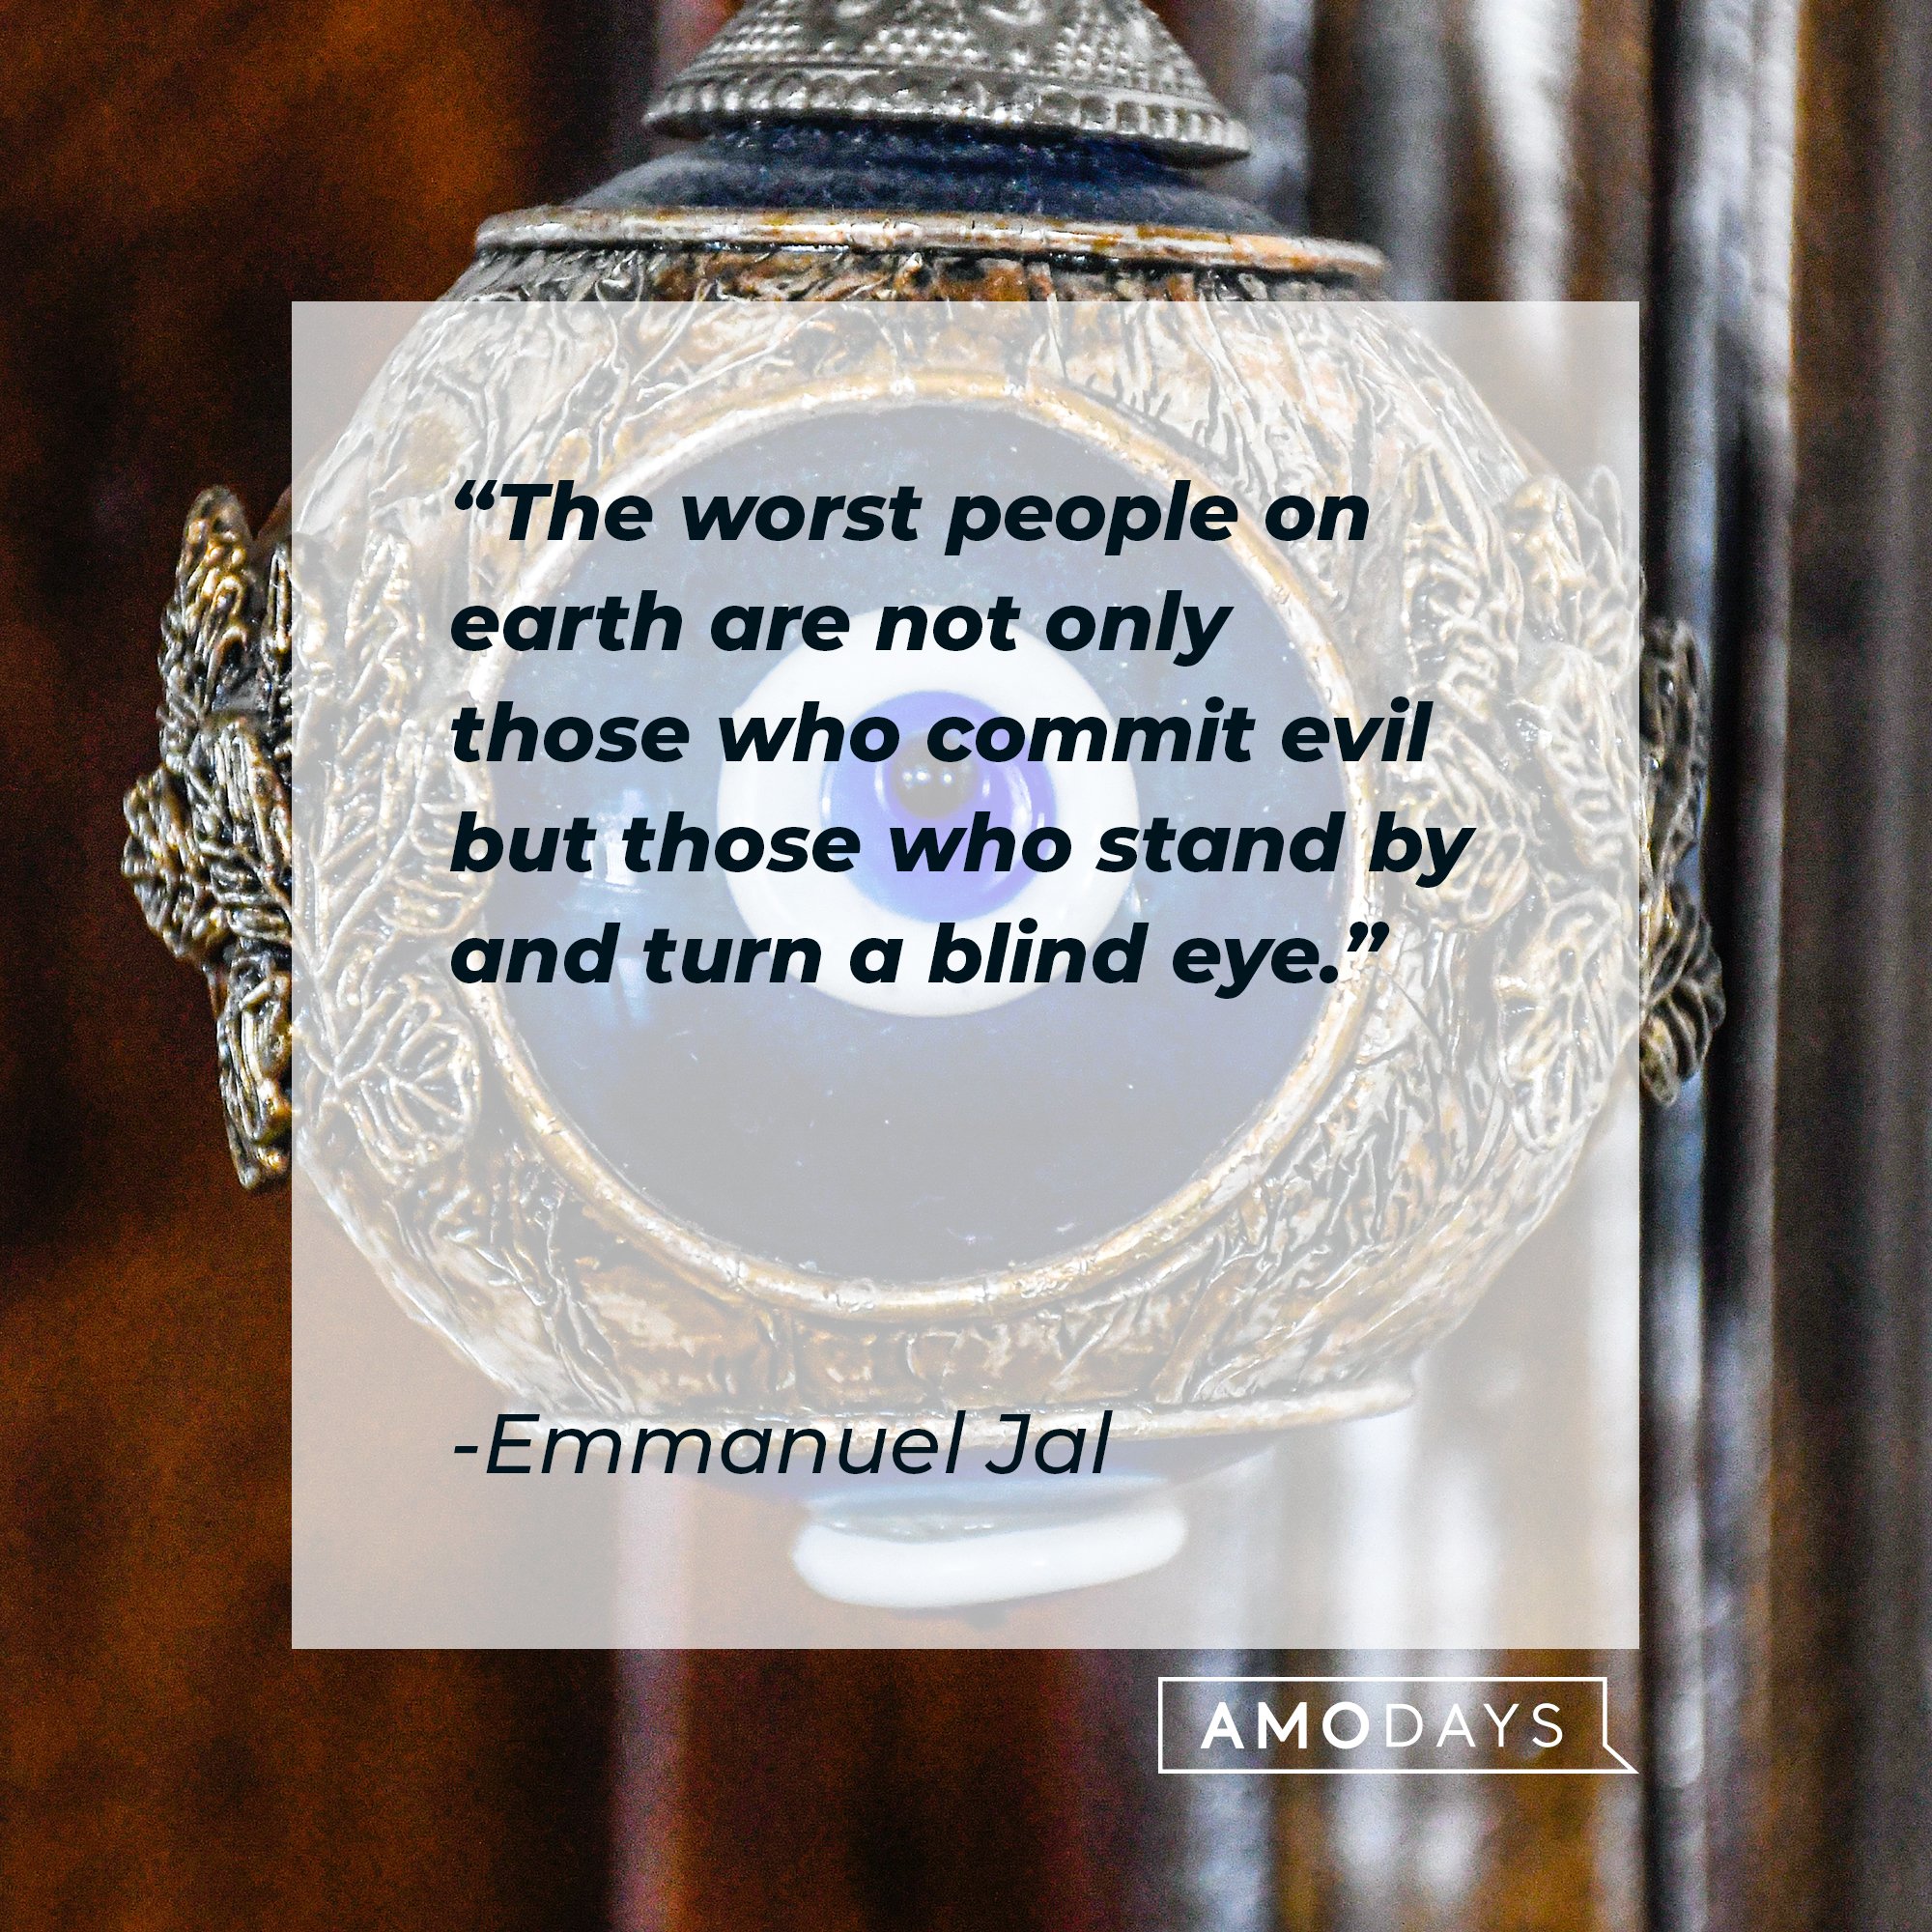 Emmanuel Jal’s quote: "The worst people on earth are not only those who commit evil but those who stand by and turn a blind eye." | Image: AmoDays